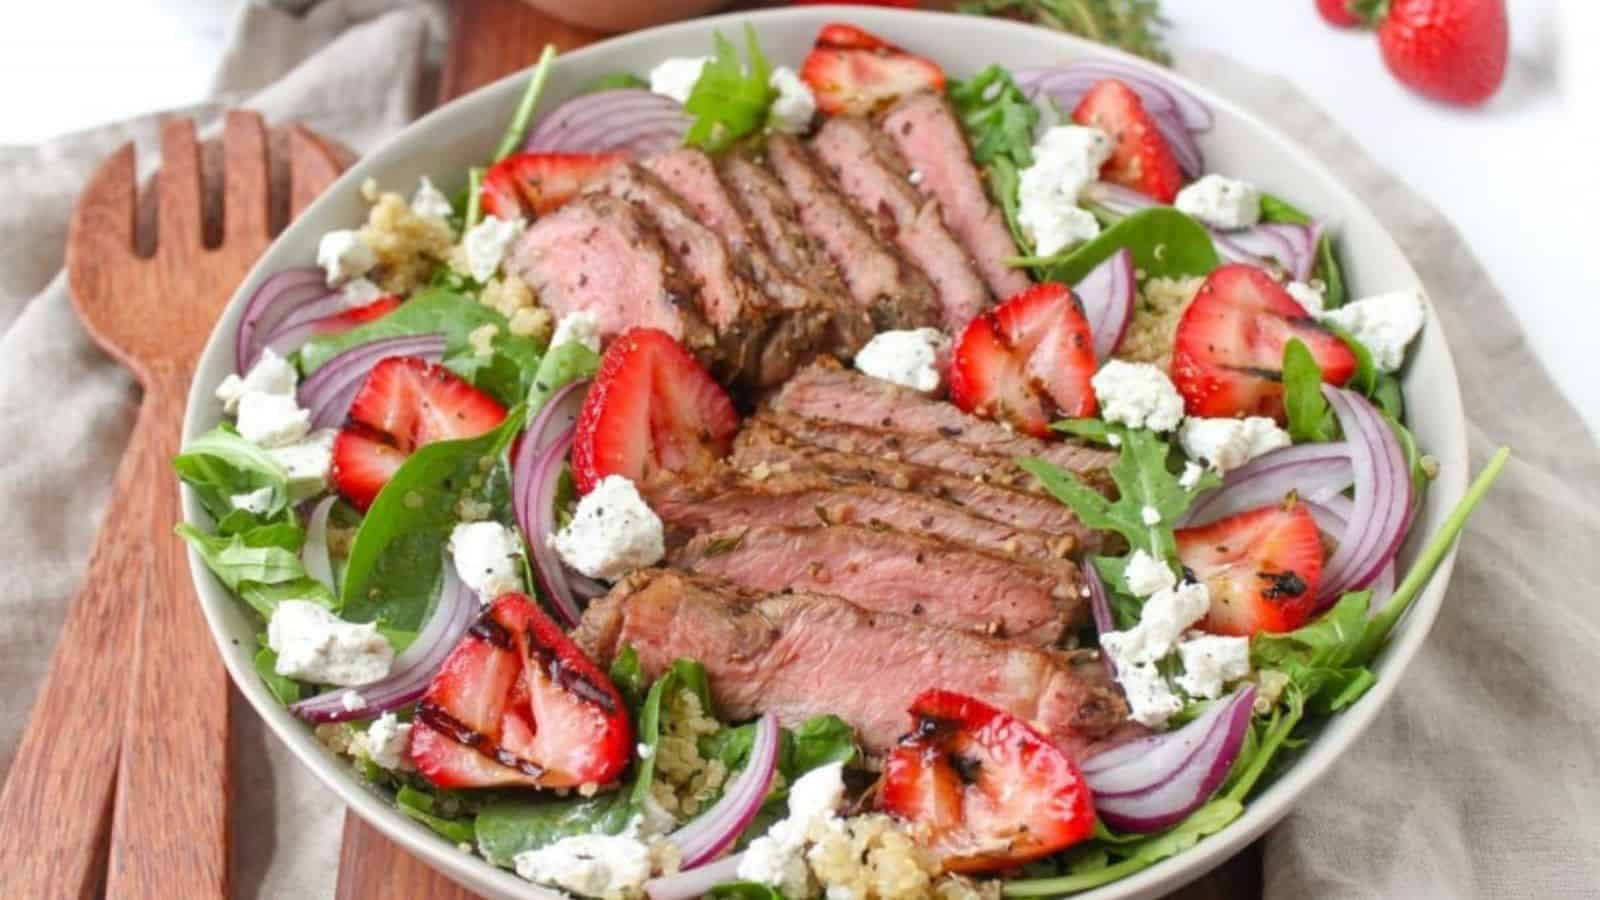 A shallow bowl with greens, grilled steak, strawberries, and crumbled goat cheese.